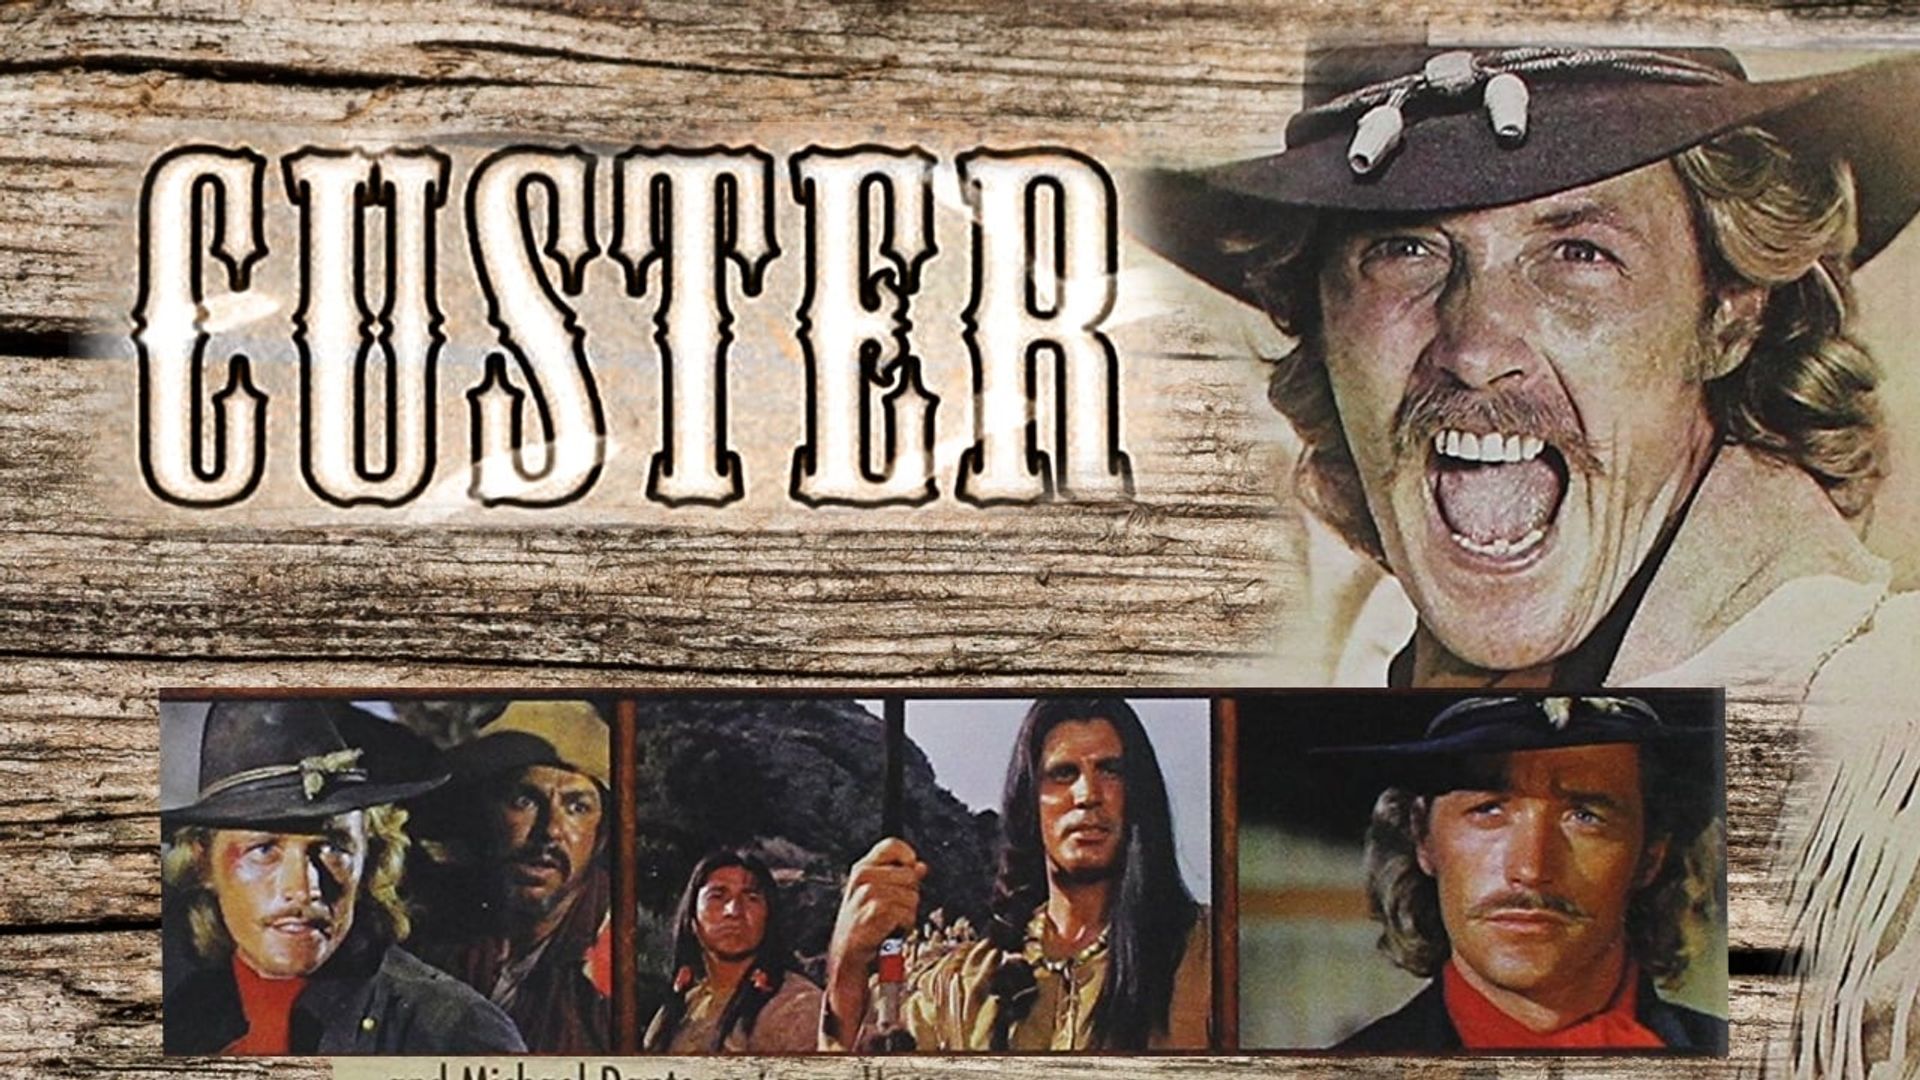 Custer background